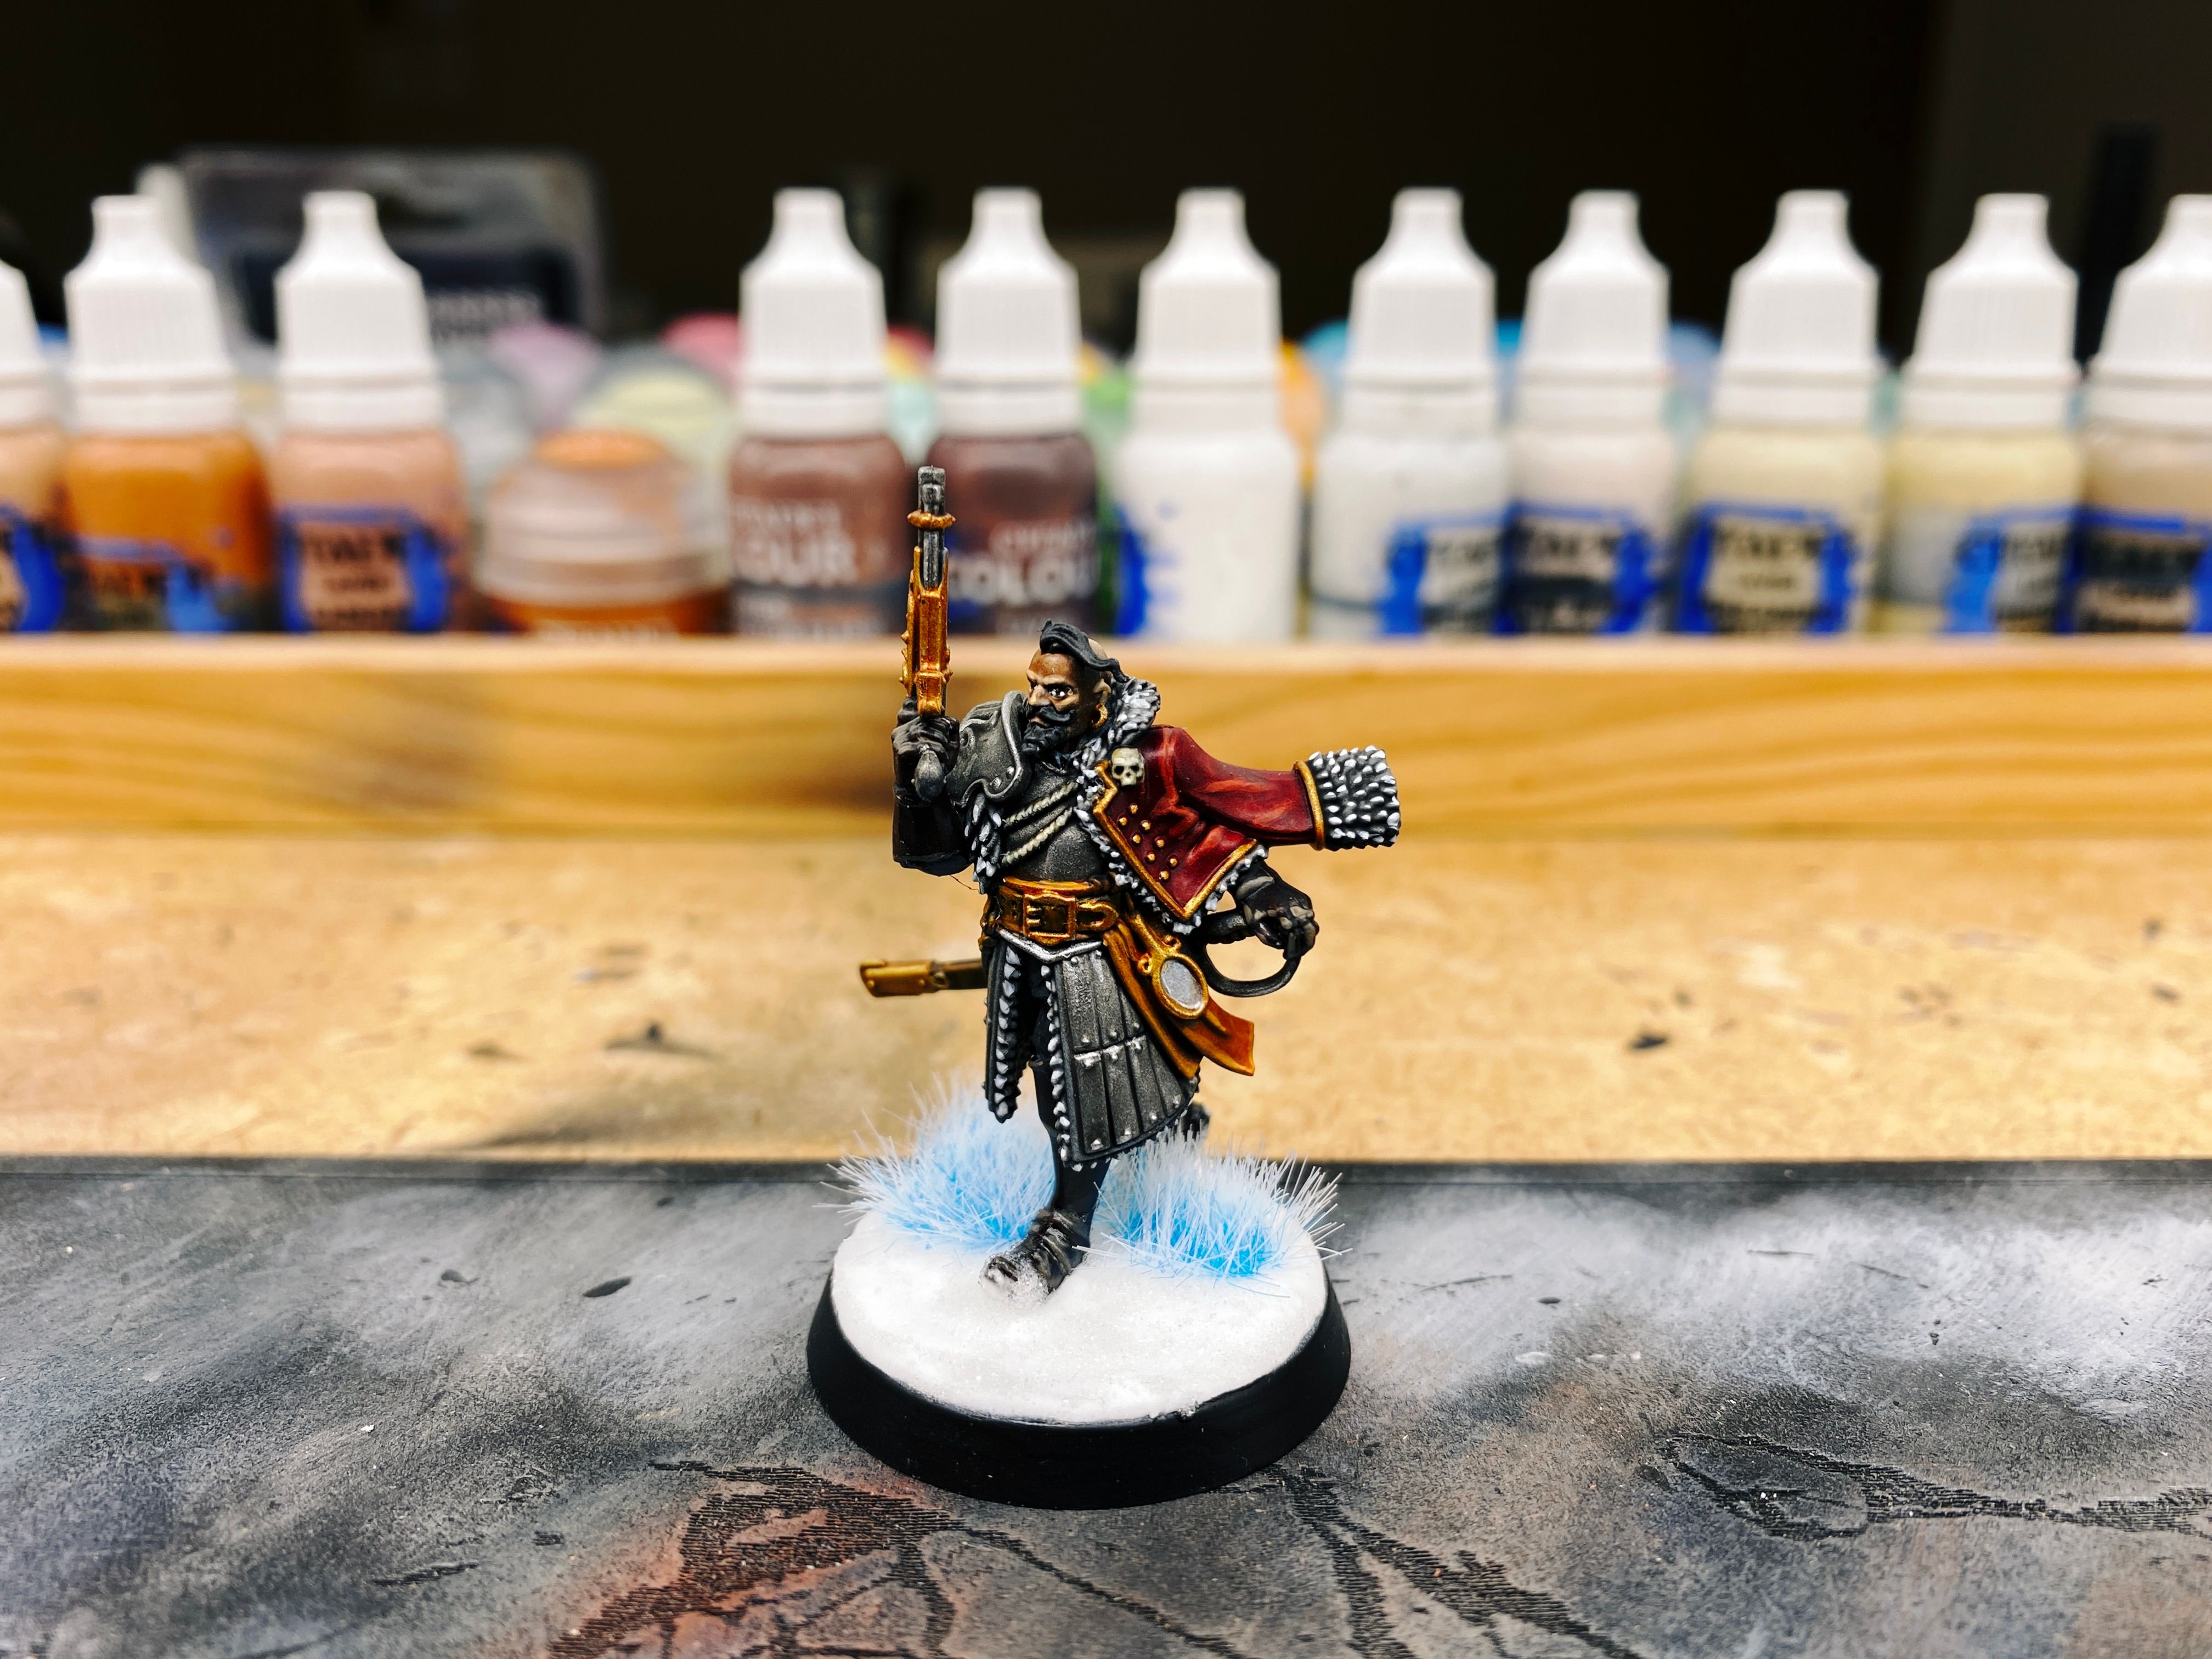 A photo of an aristocratic-looking miniature mid-stride. He's got a magnificent beard and mustache that's curled up at the ends, plus a long top-knot of hair and the rest of his head is bald. He's holding a steampunk-looking pistol upright and has a red jacket edged with white fur billowing out behind him, and his other hand is on the pommel of his sword. His robe thing is lined with armour plates and he's wearing an armoured chestpiece as well.